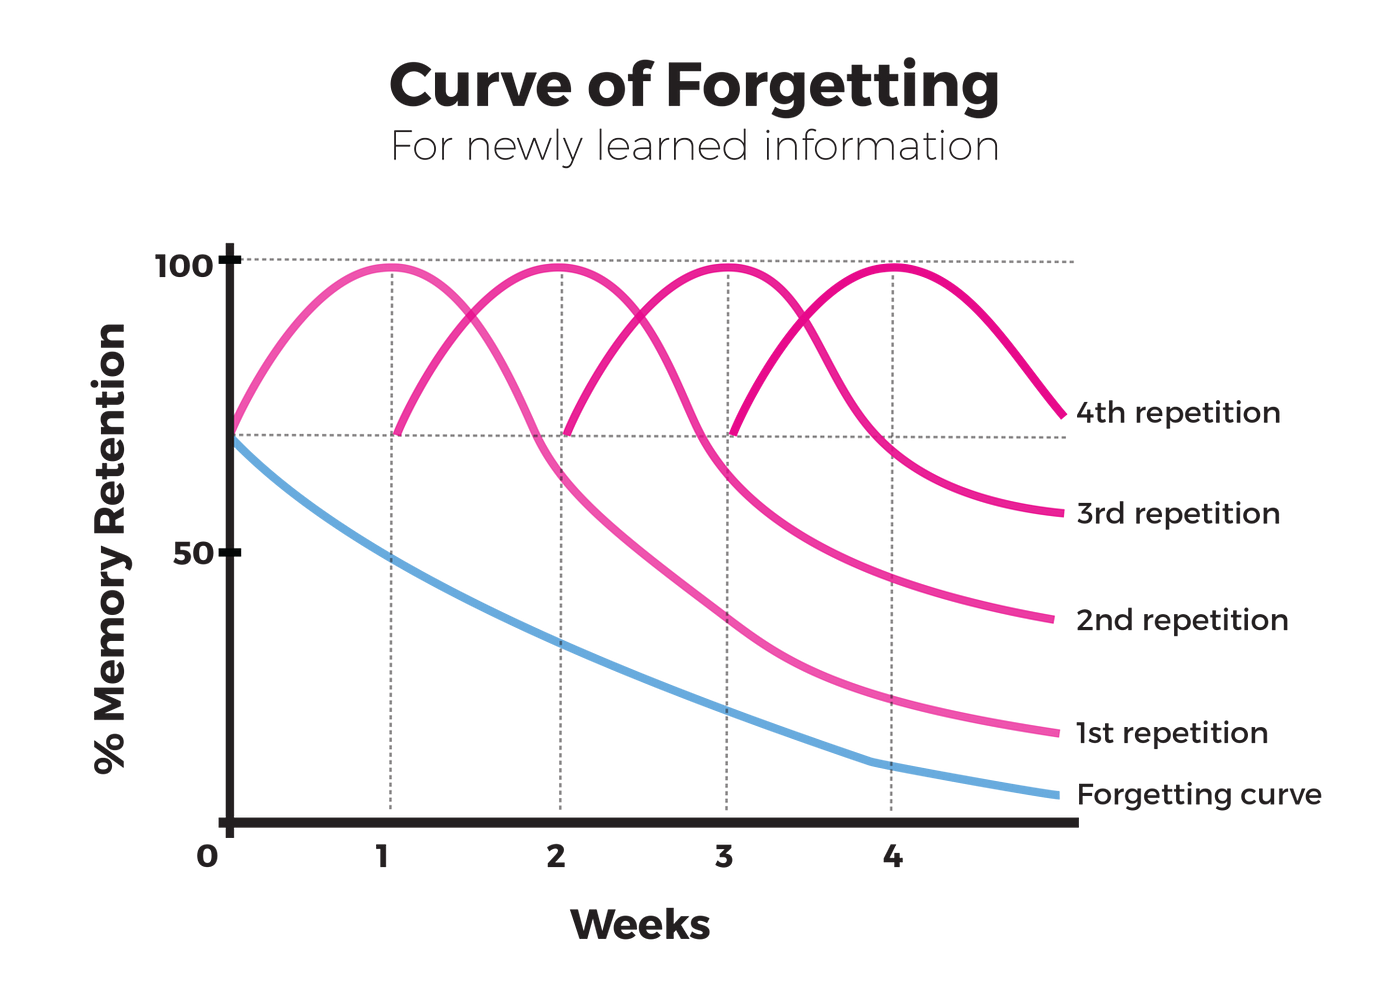 What you need to know… about The Curve of Forgetting, by How Do I?